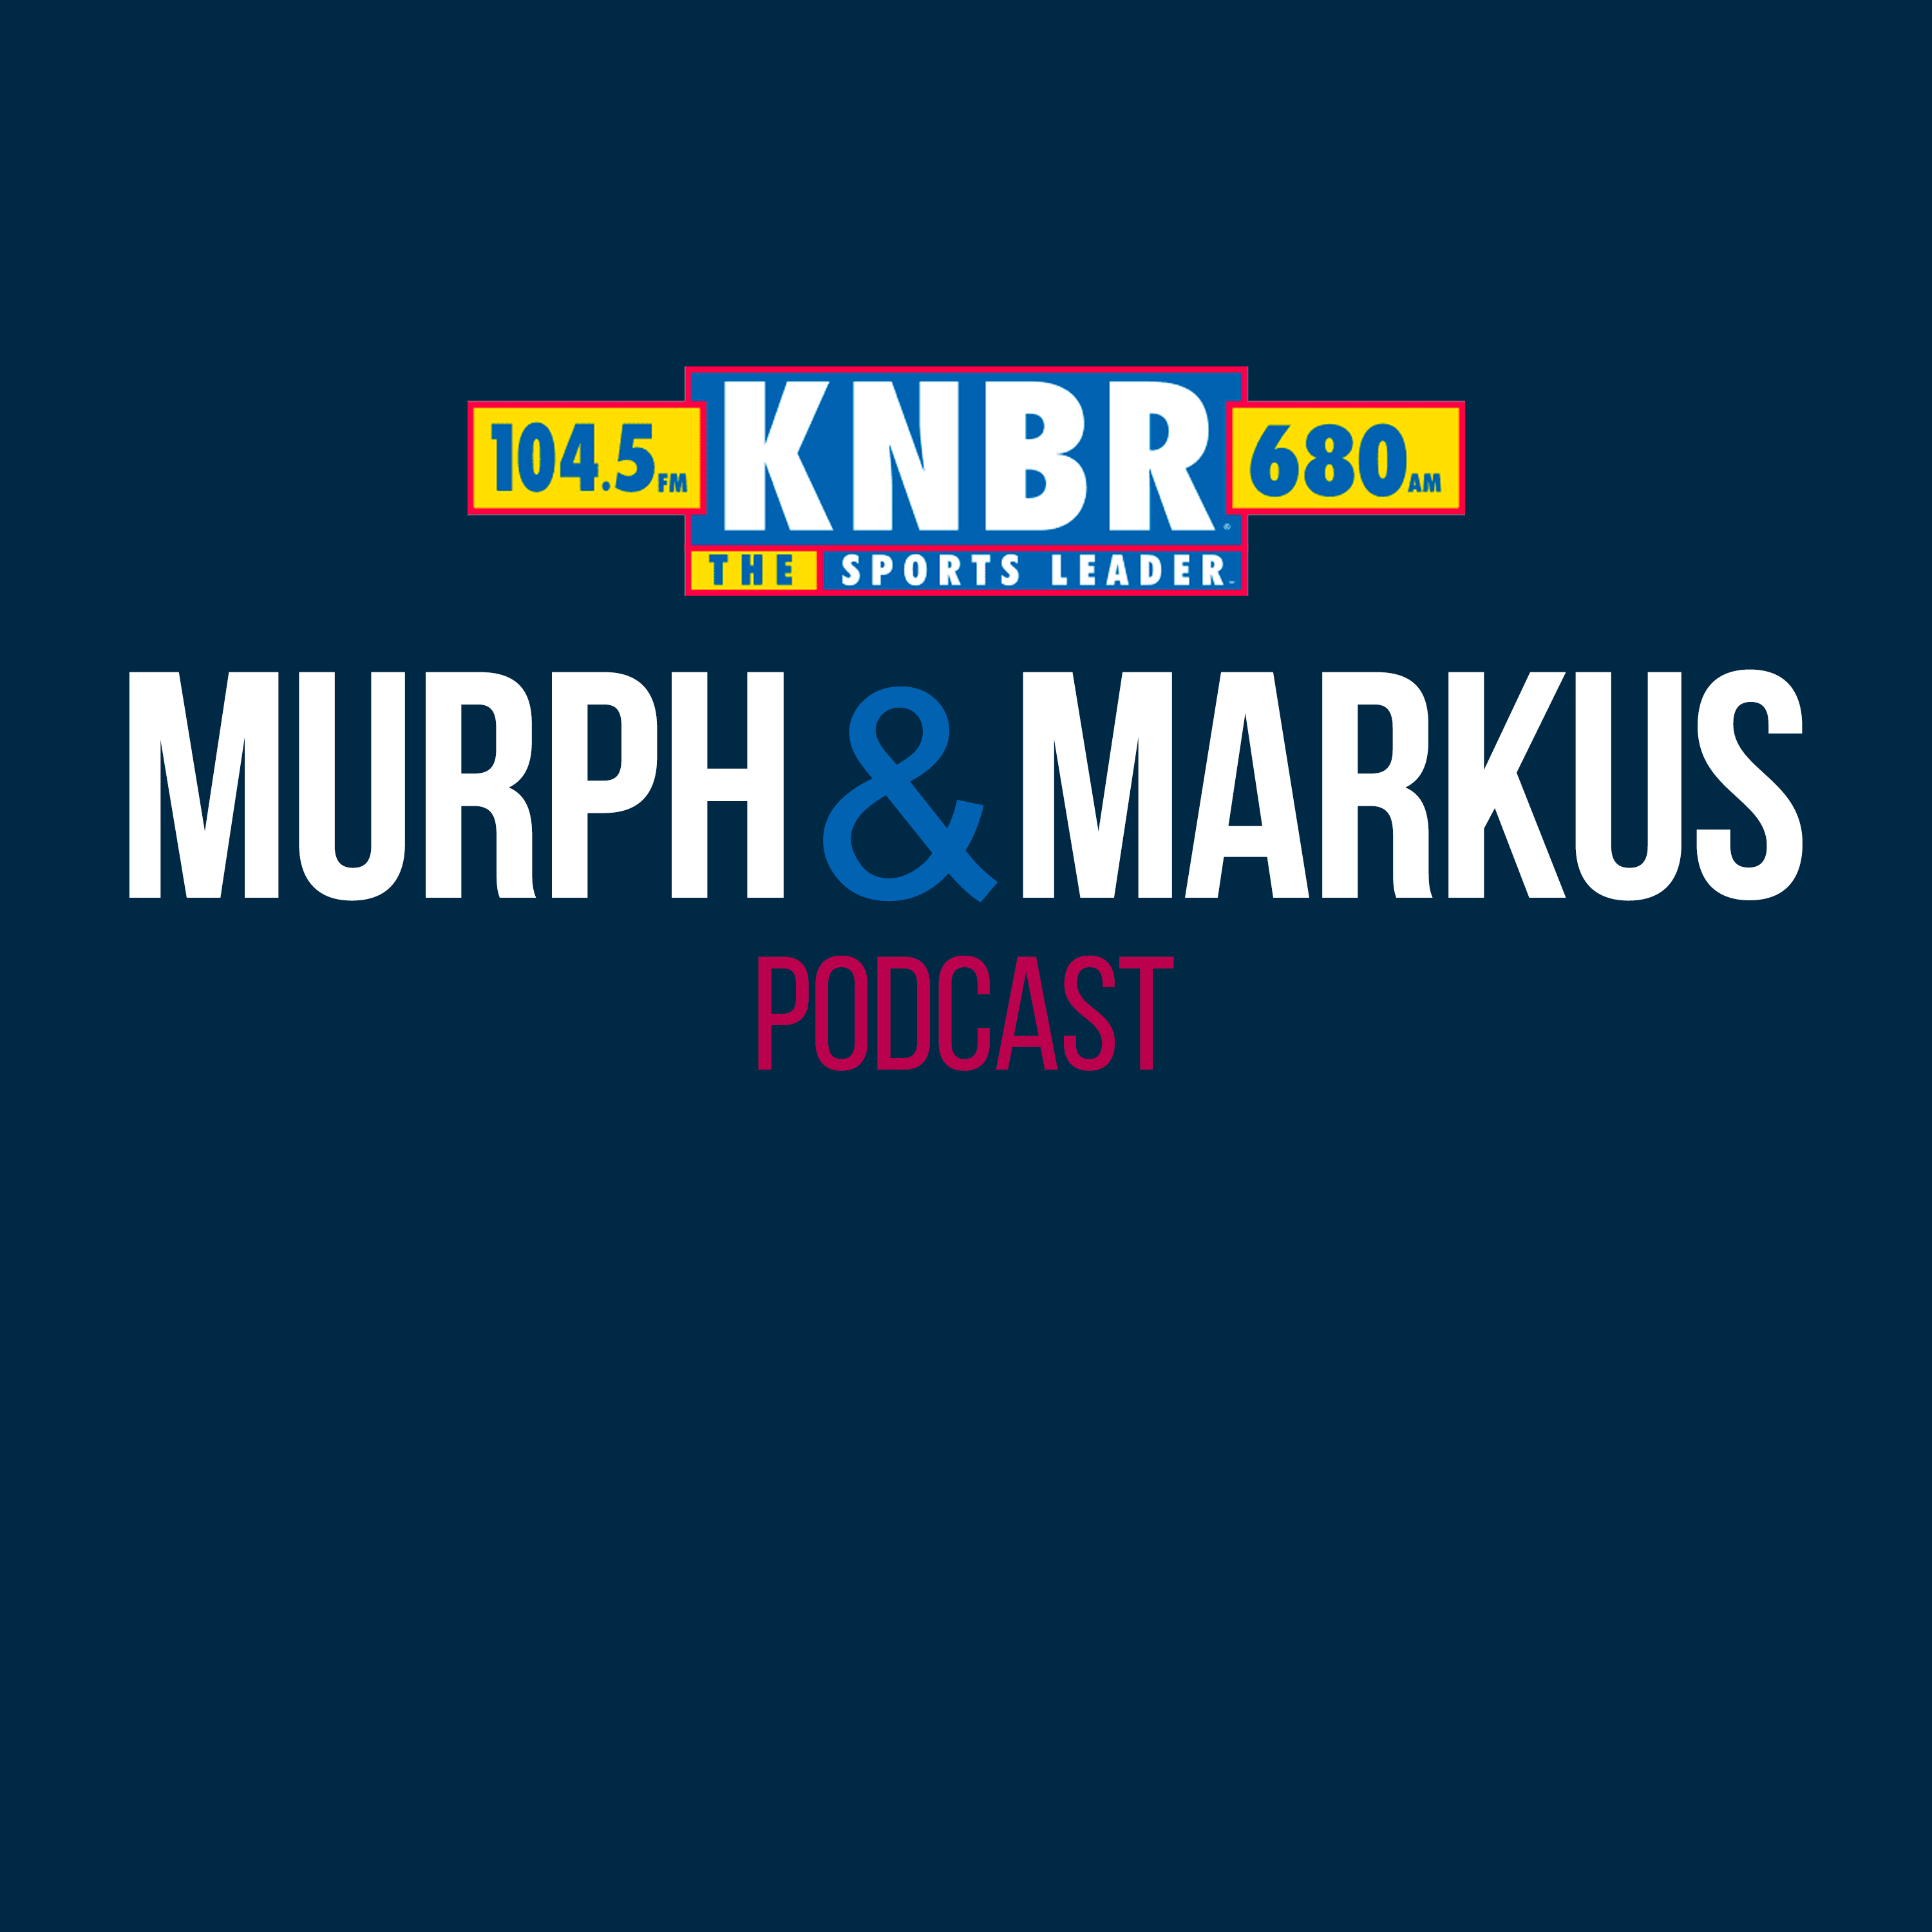 5/22 KNBR Giants Insider, Andrew Baggarly joined Murph and Markus to discuss the road trip and how the team can rebound after last night's loss